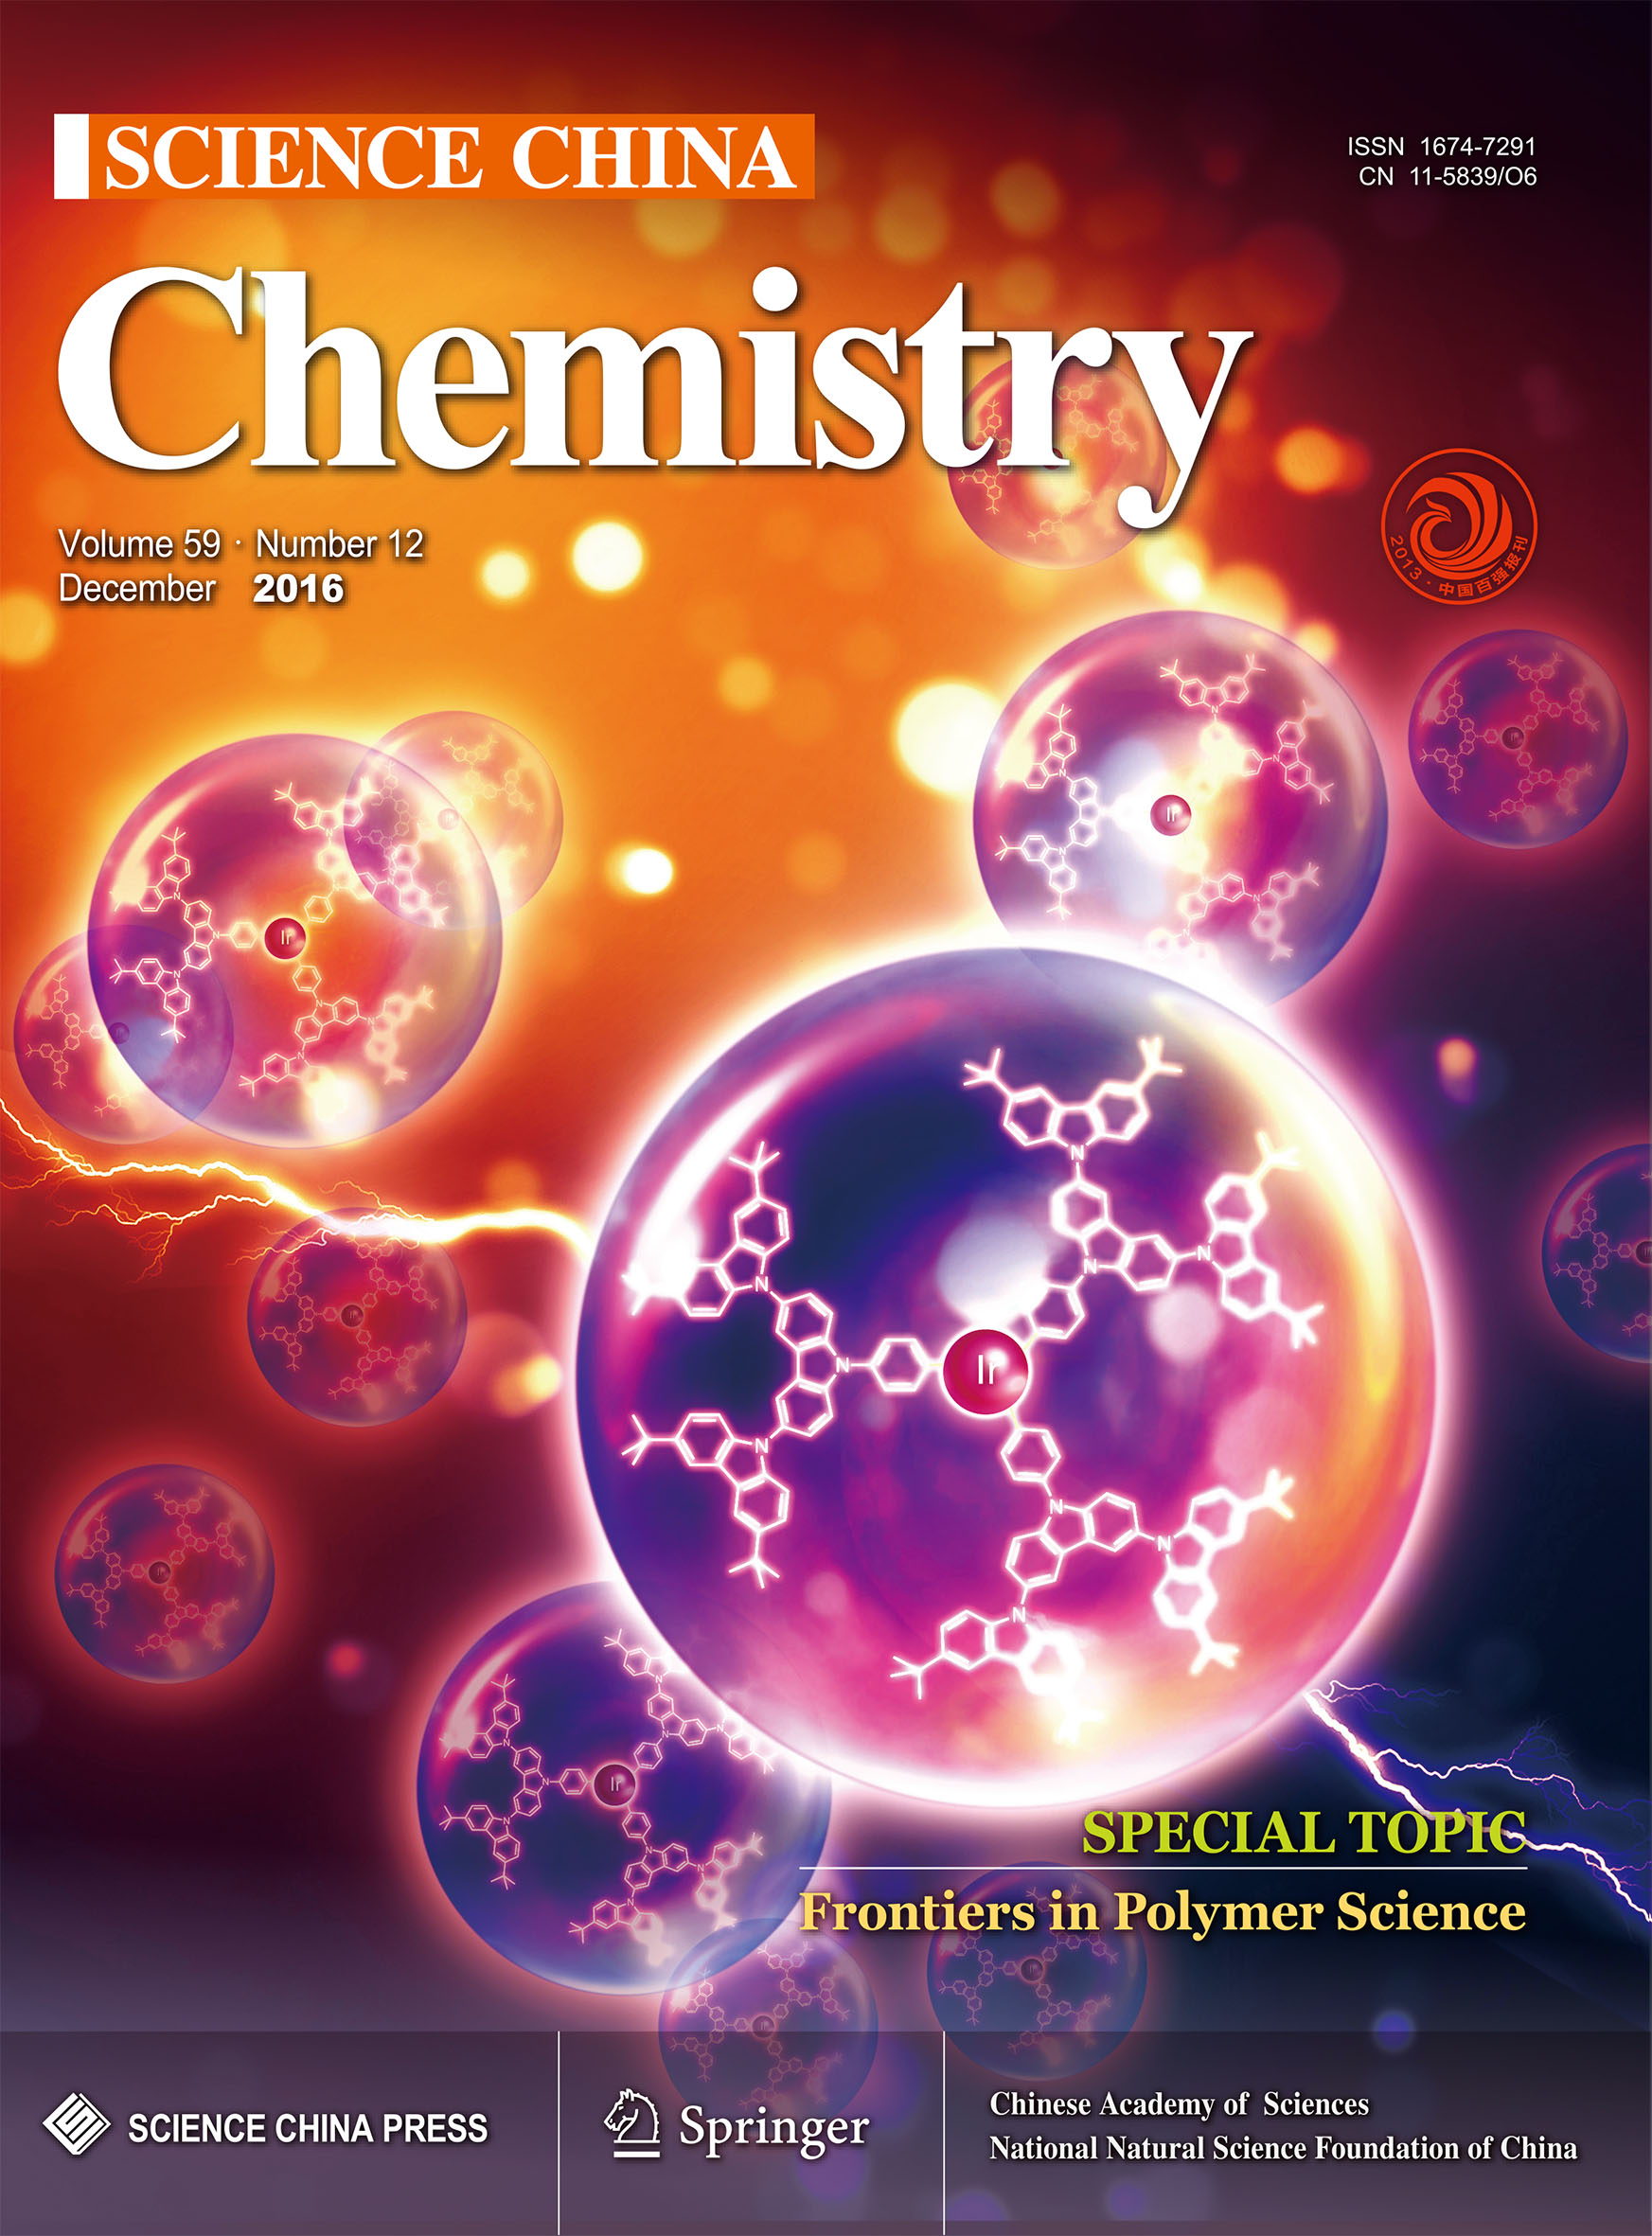 76. Giant Molecules: Where Chemistry, Physics, and Bio-Science Meet. Sci. China. Chem. 2017, 60, 338-352